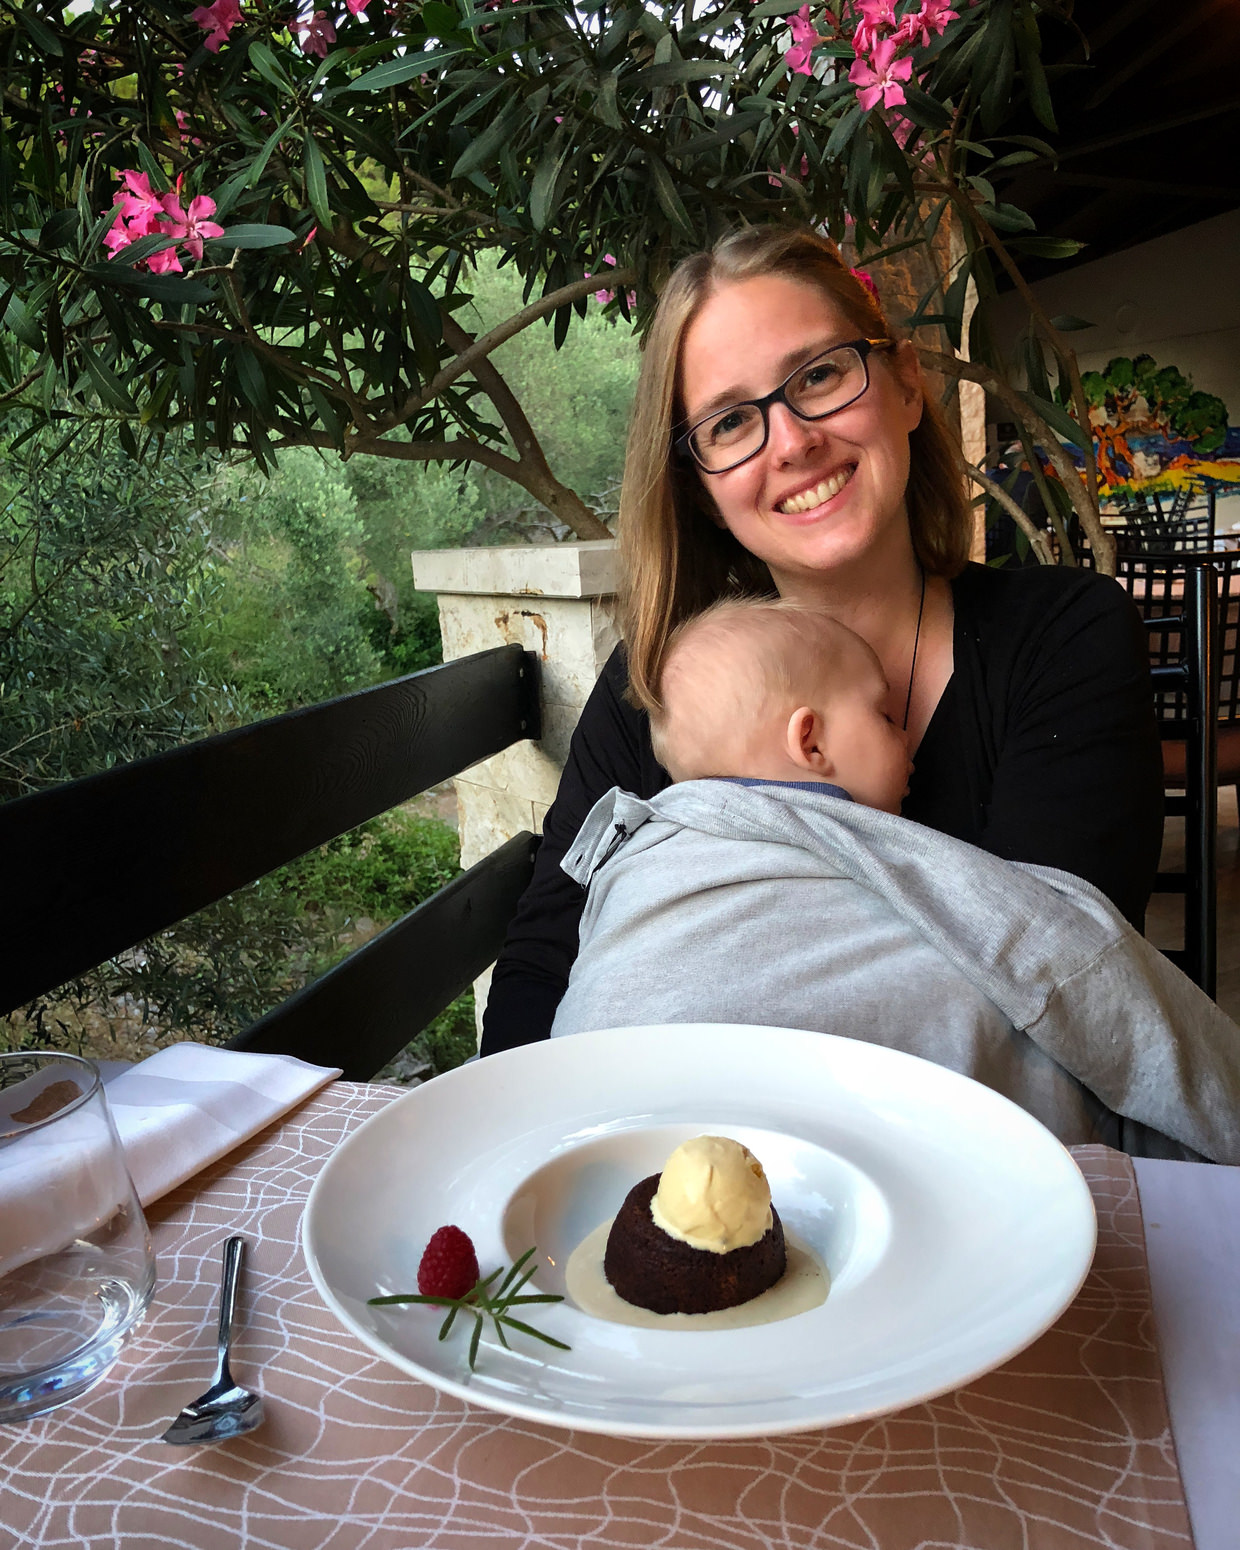 Samantha with soufflé and Conway asleep at Restaurant Rosemary